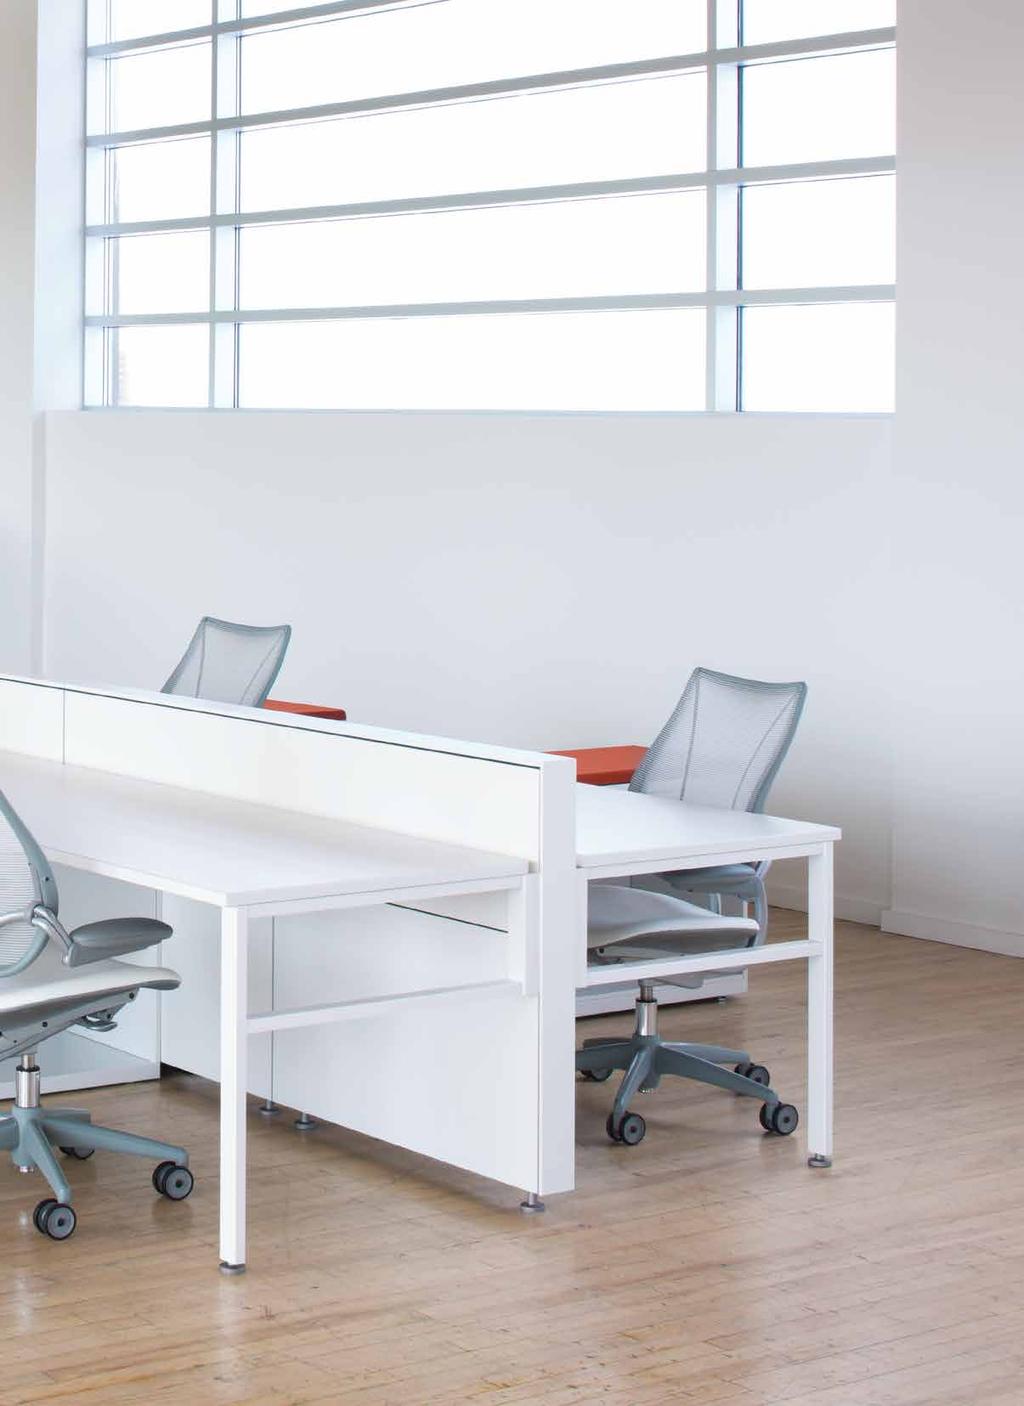 plan with planna Adaptable, flexible and beautiful, Planna works in virtually any area of the office from private offices to workstations